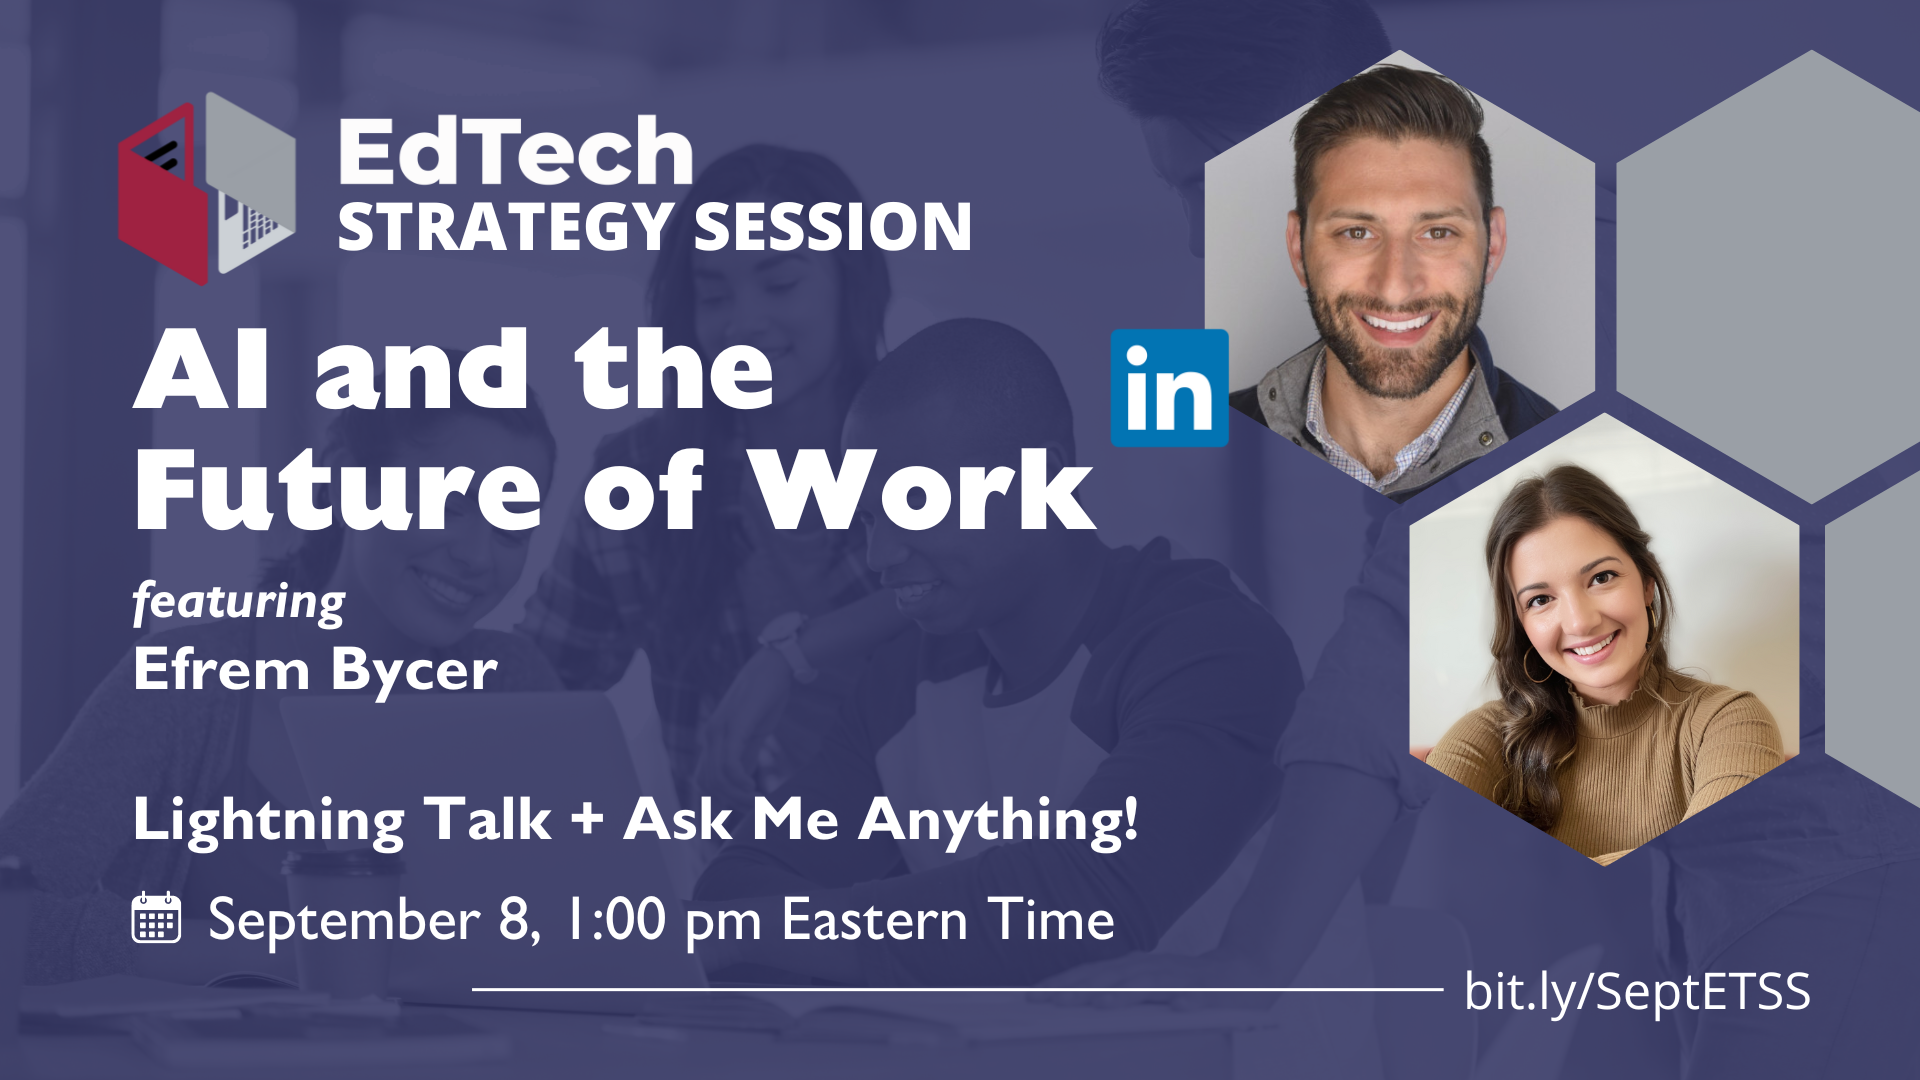 EdTech Strategy Session AI and the Future of Work featuring Efrem Bycer Lightning Talk + Ask Me Anything! September 8, 1:00pm Eastern Time bit.ly/SeptETSS